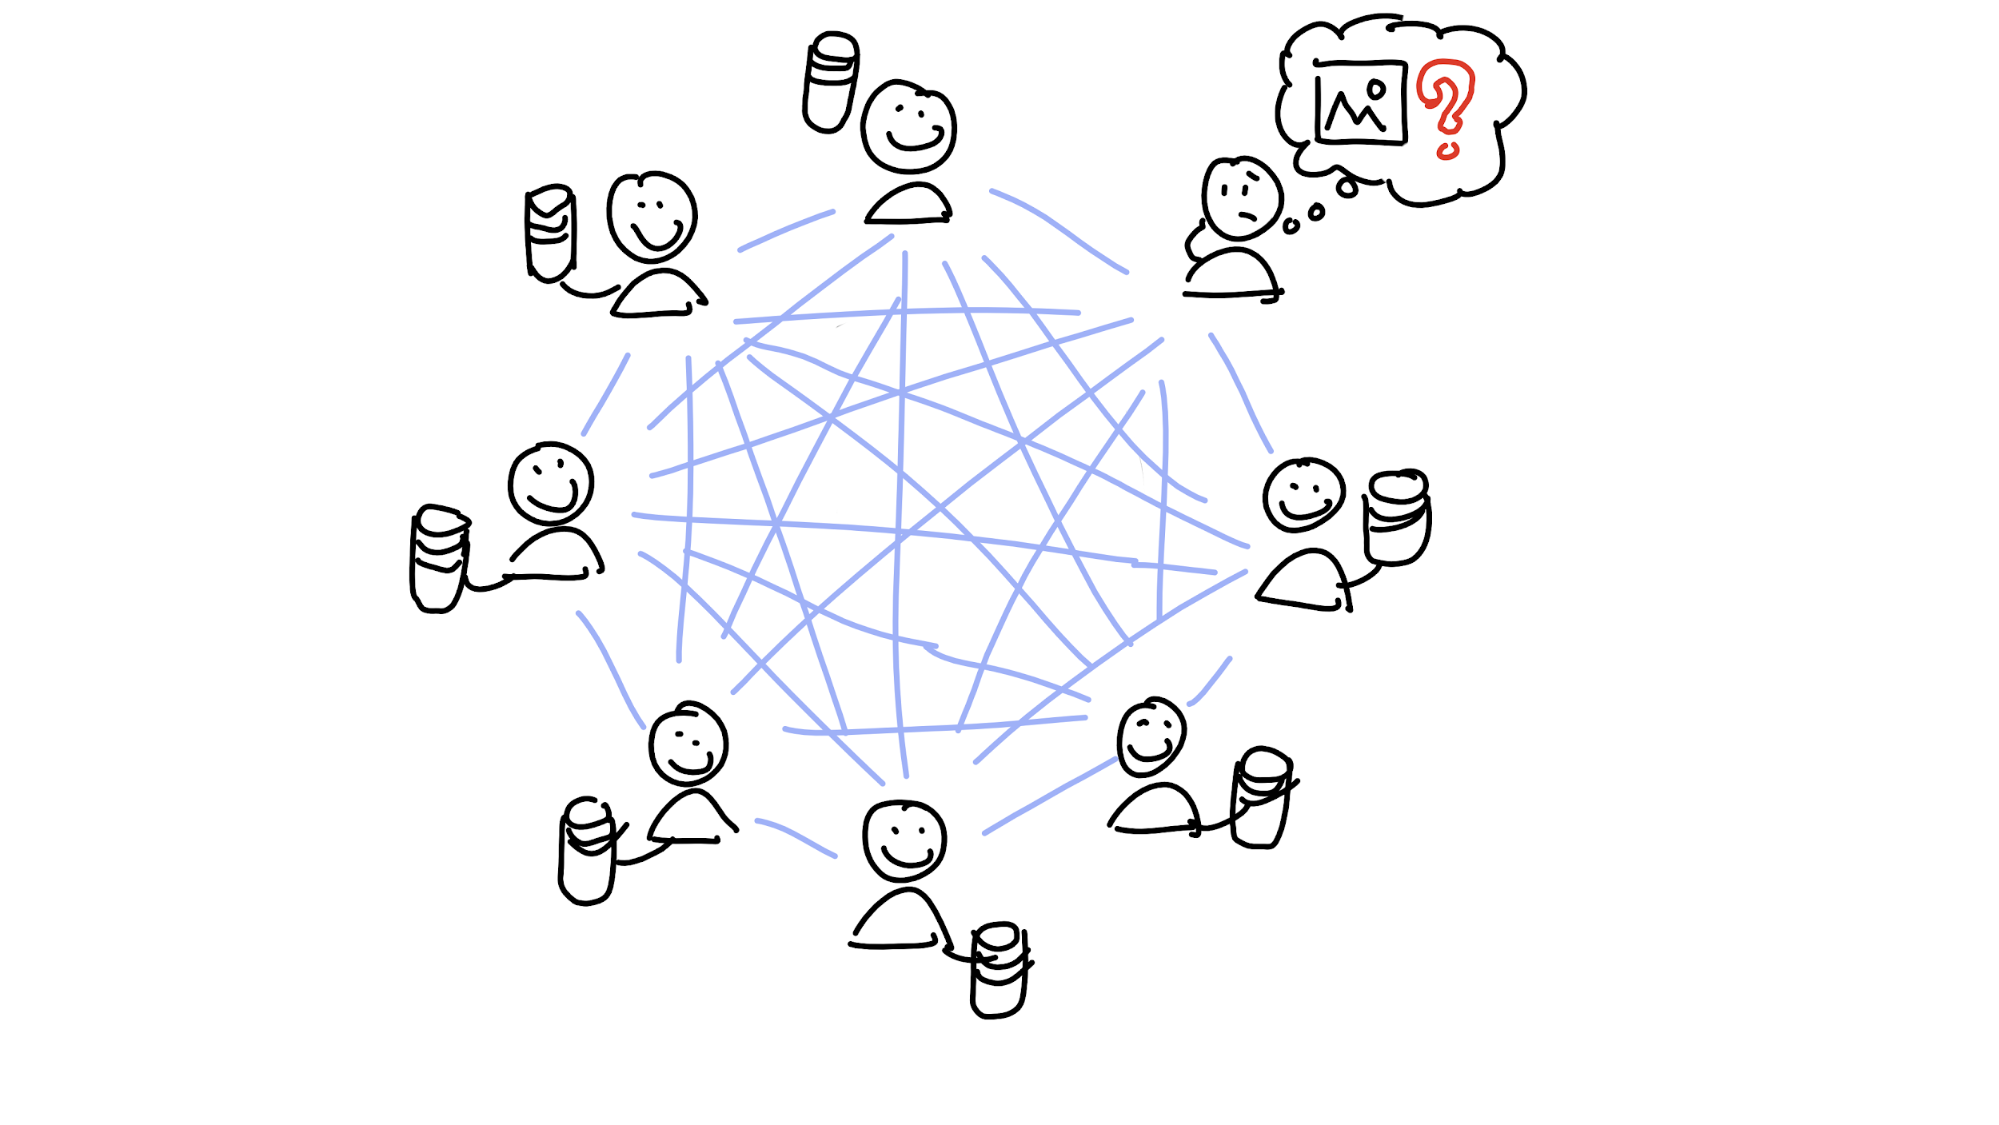 Eight people, all storing some data and connected directly to each other. One of them wants to retrieve a piece of data but doesn't know who to talk to.